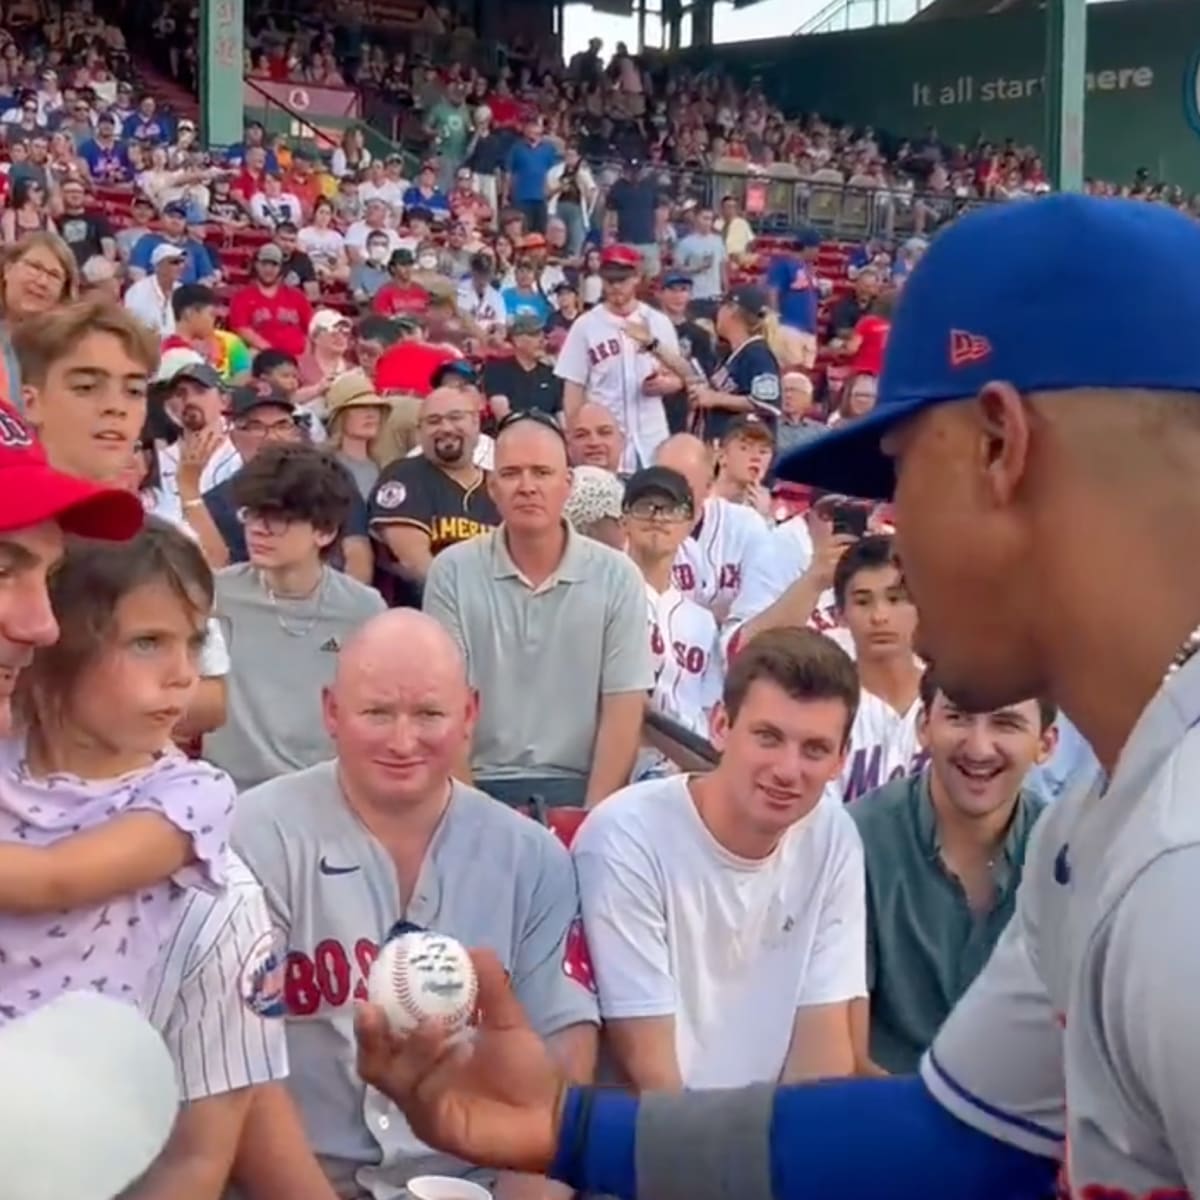 MLB fans react to Francisco Lindor giving a signed ball to a young Red Sox  fan -Such a class act